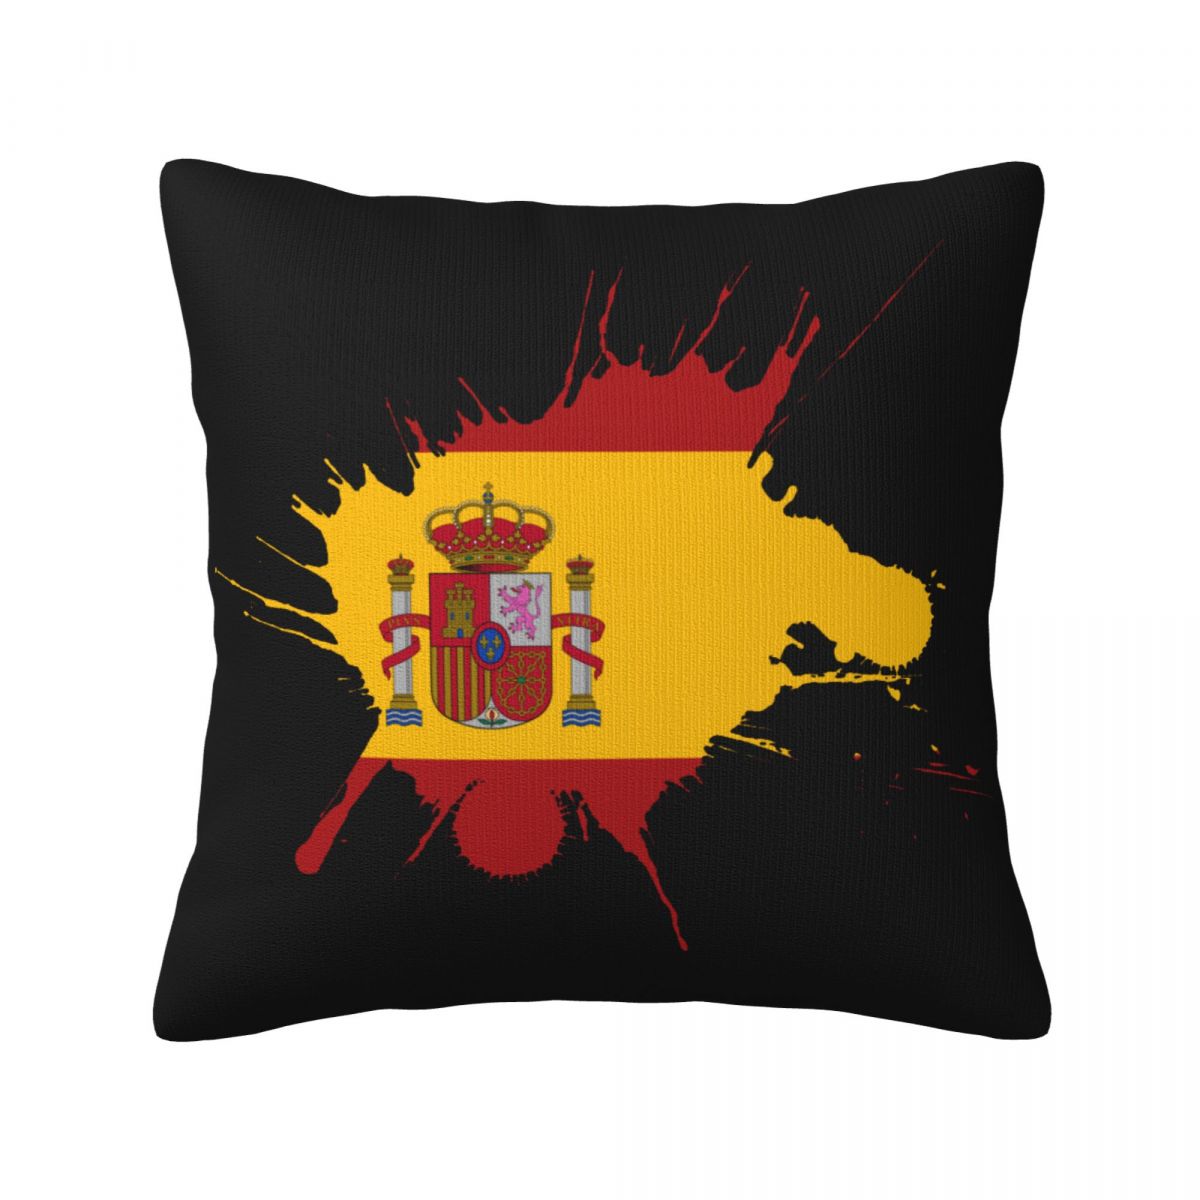 Spain Ink Spatter Decorative Square Throw Pillow Covers